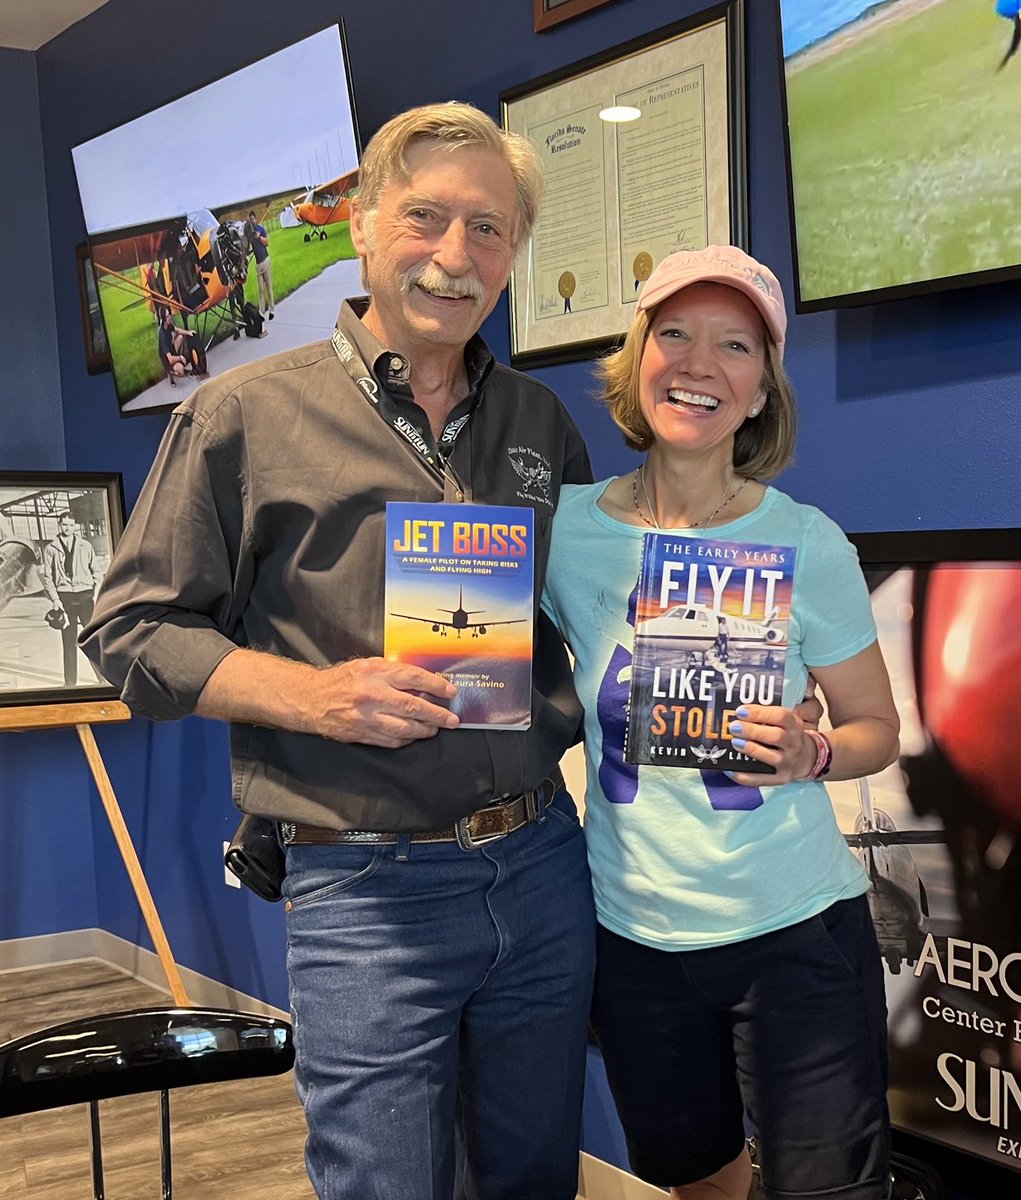 Book signing with ‘Airplane Repo’ Kevin Lacy. #SunNFun #avgeek #writingcommunity #aviation #pilots #flying